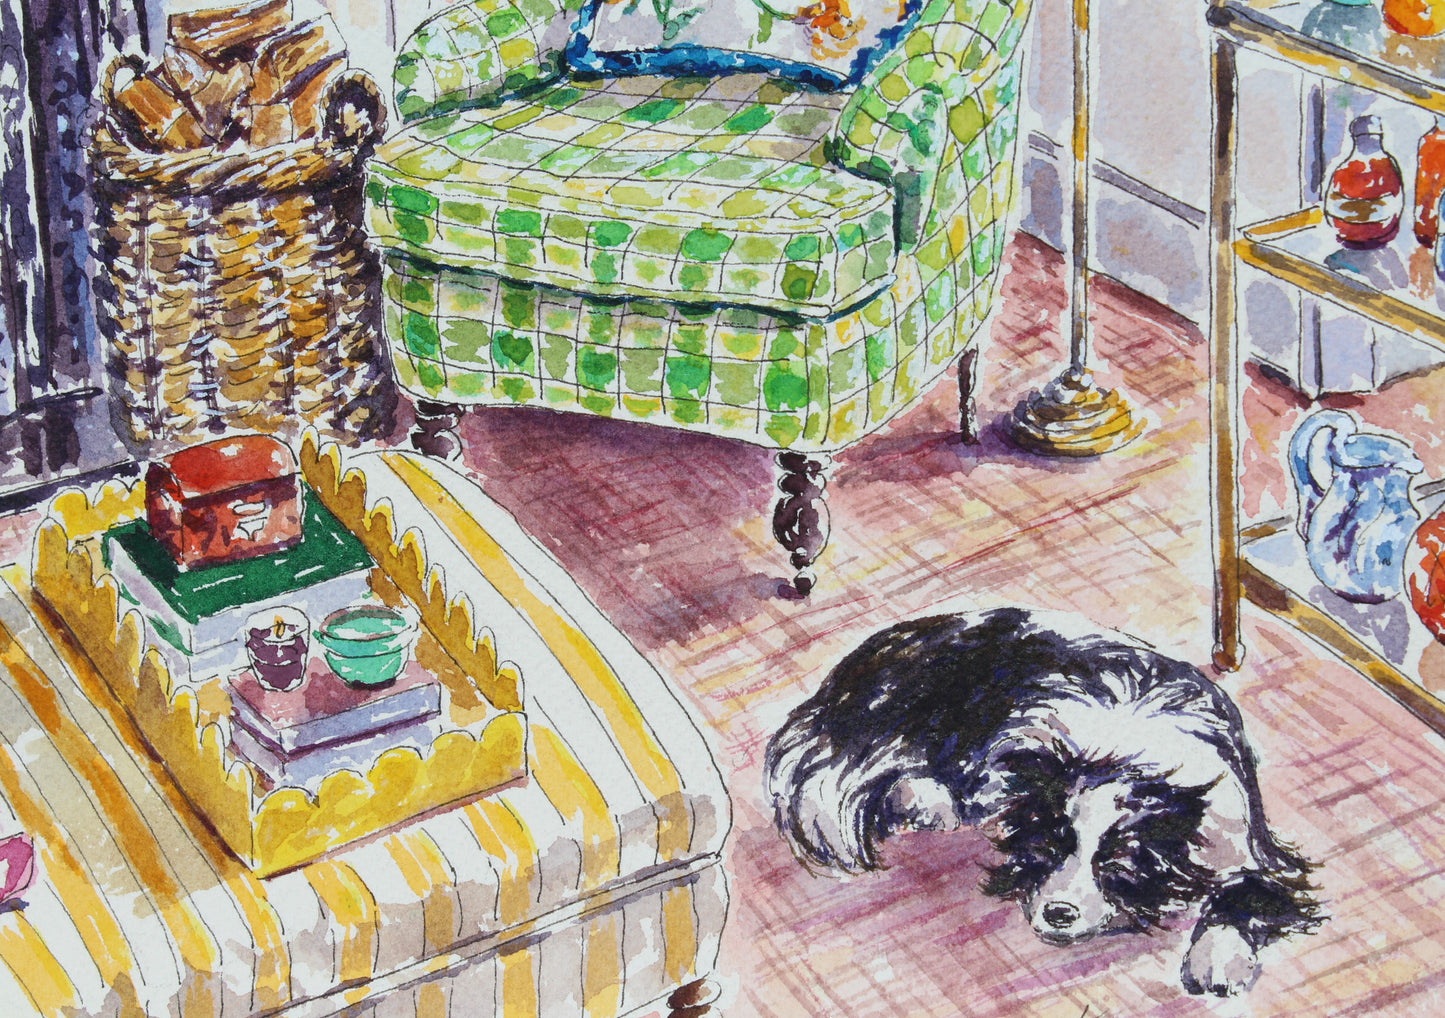 Sheep Dog, An Original 14" x 10" Watercolor And Ink Painting Of An Interior Scene With A Border Collie